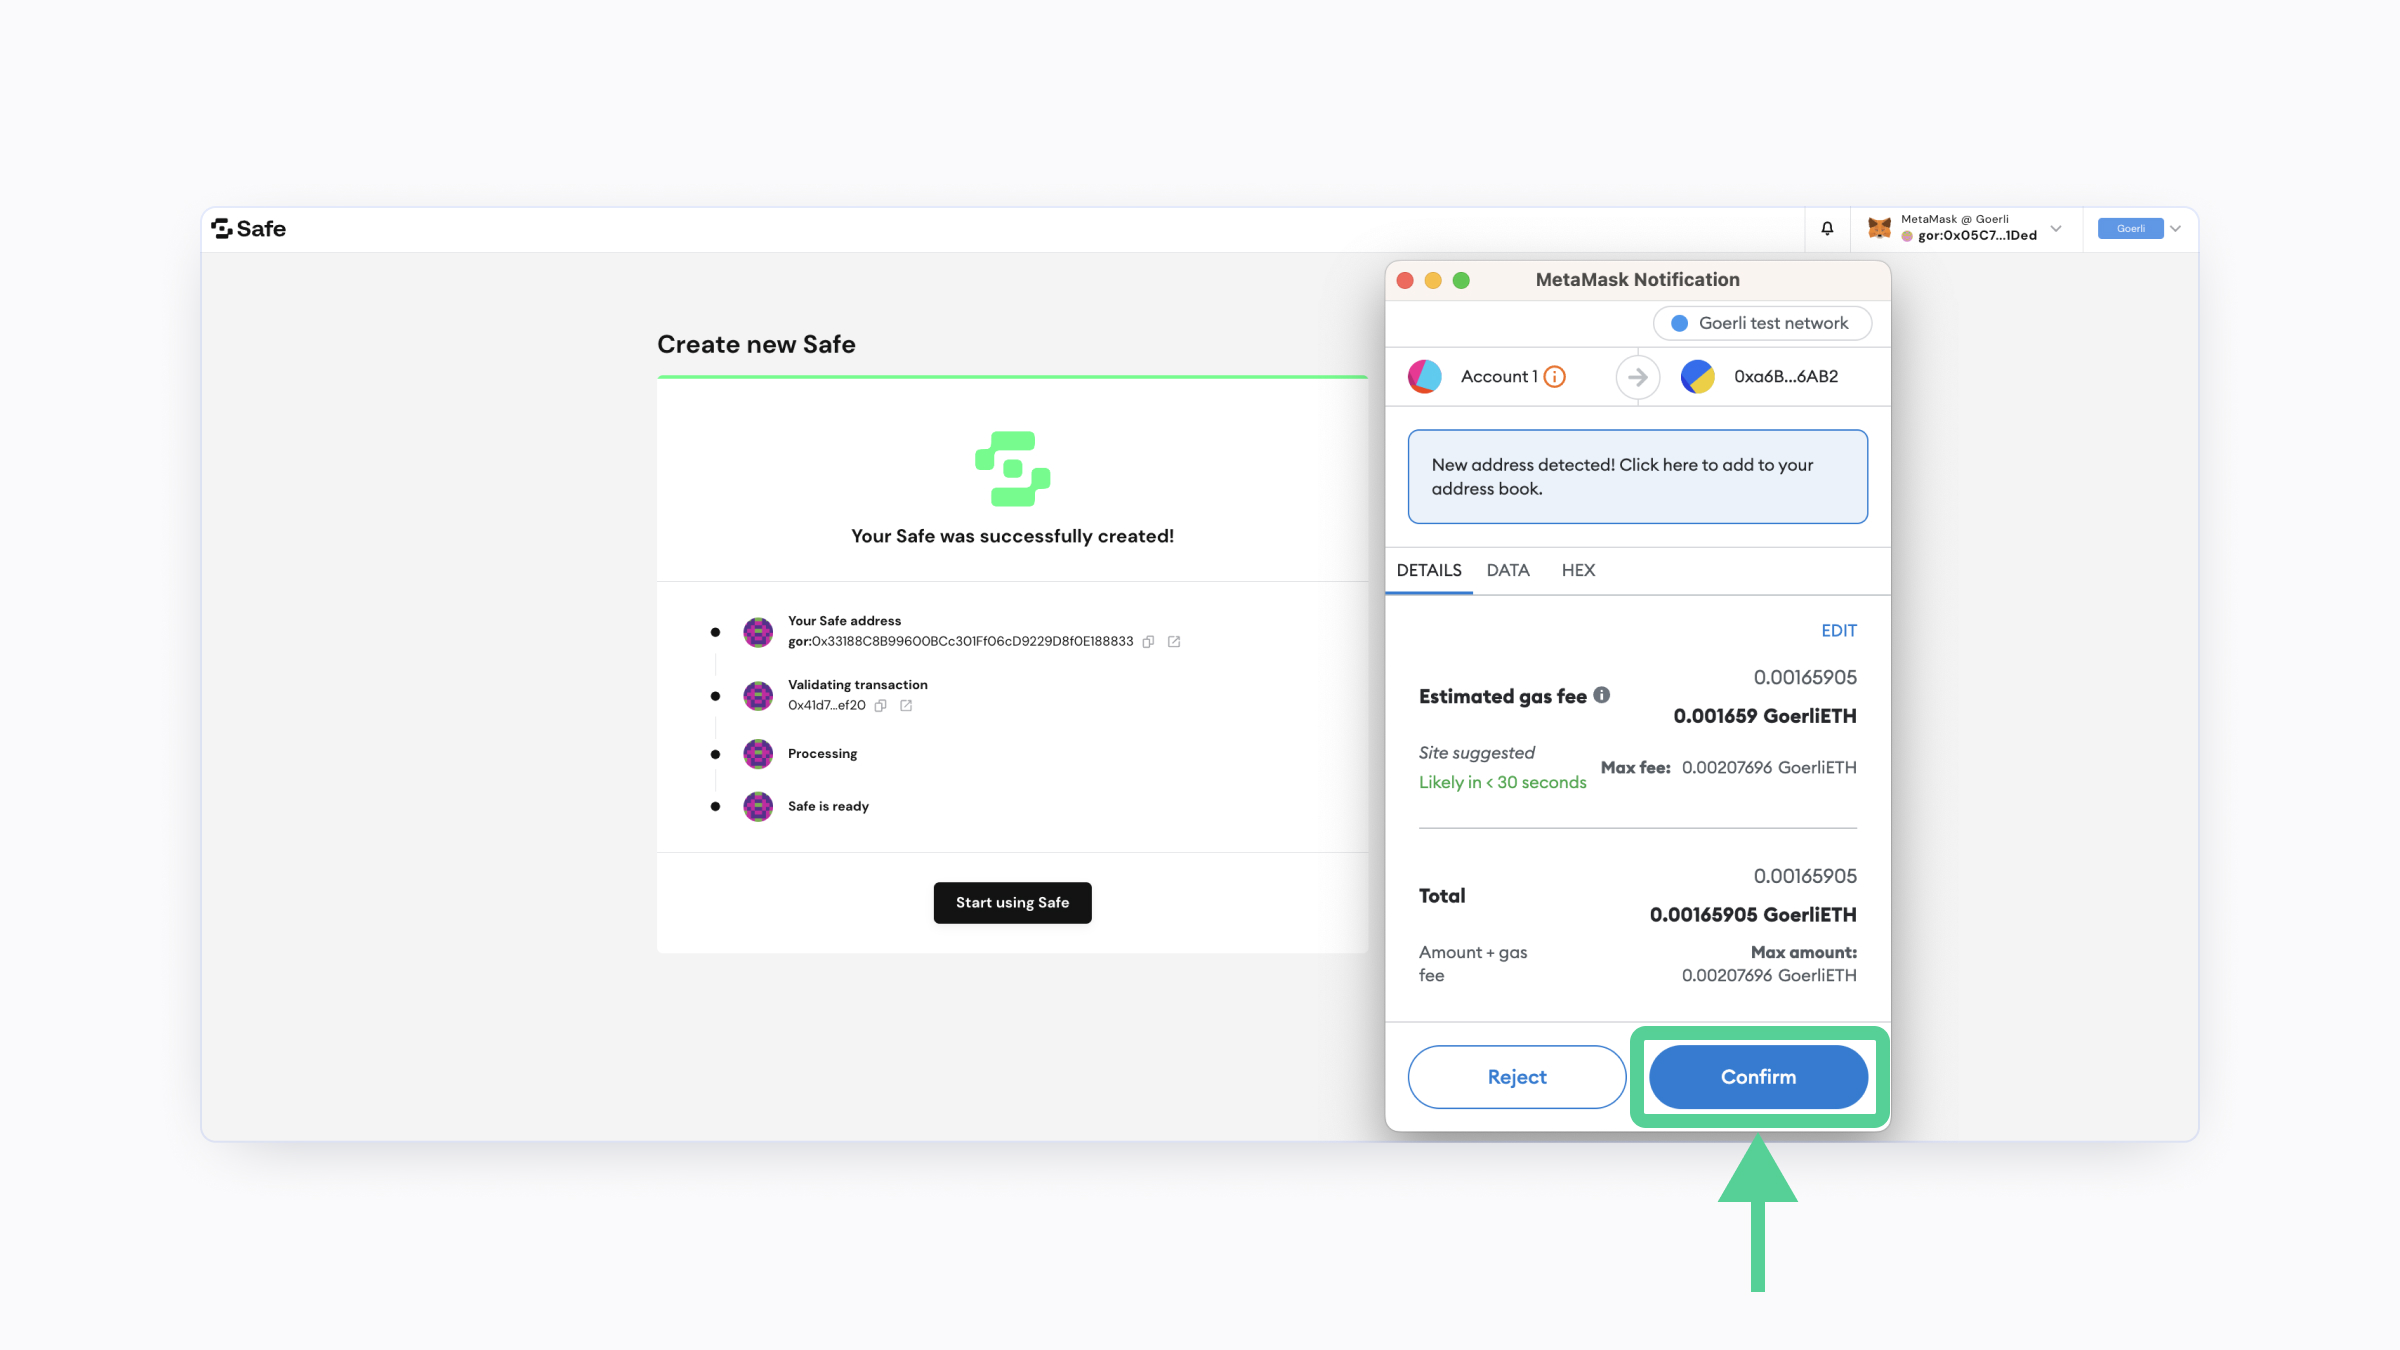 A screenshot showing the next "Confirm" button on MetaMask.